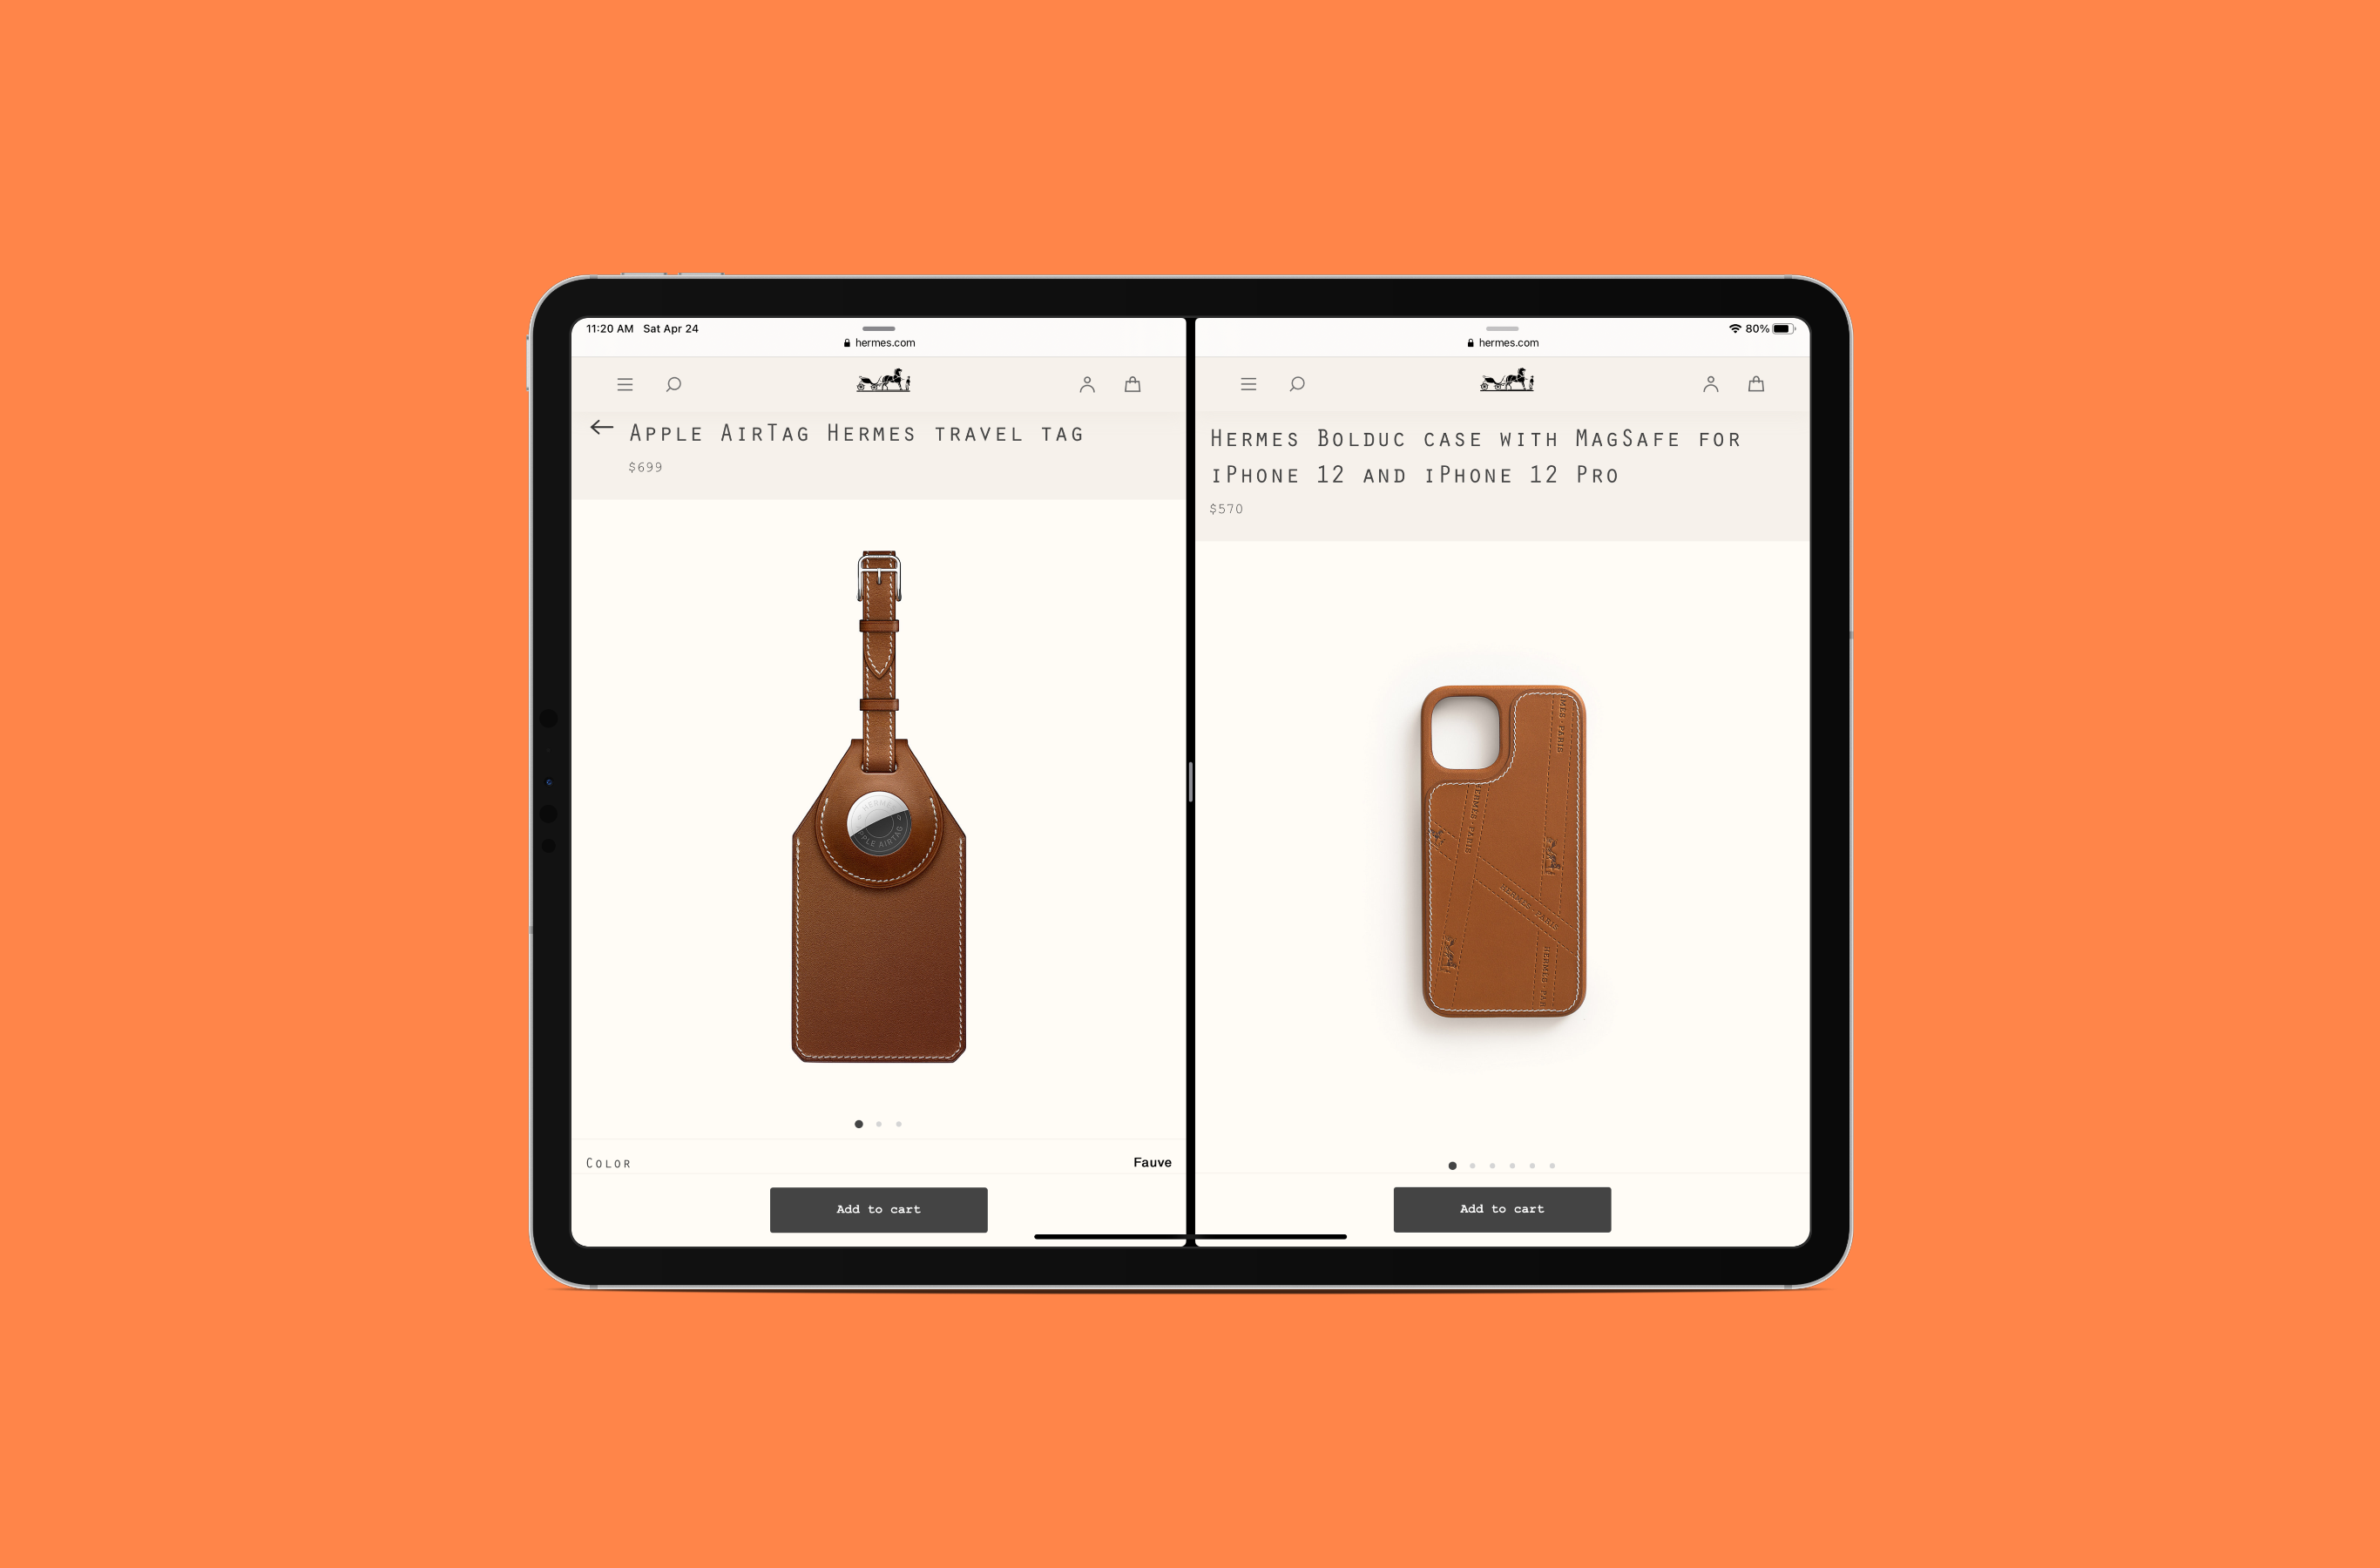 Hermès offering $699 AirTag travel tag and new $570 MagSafe case 